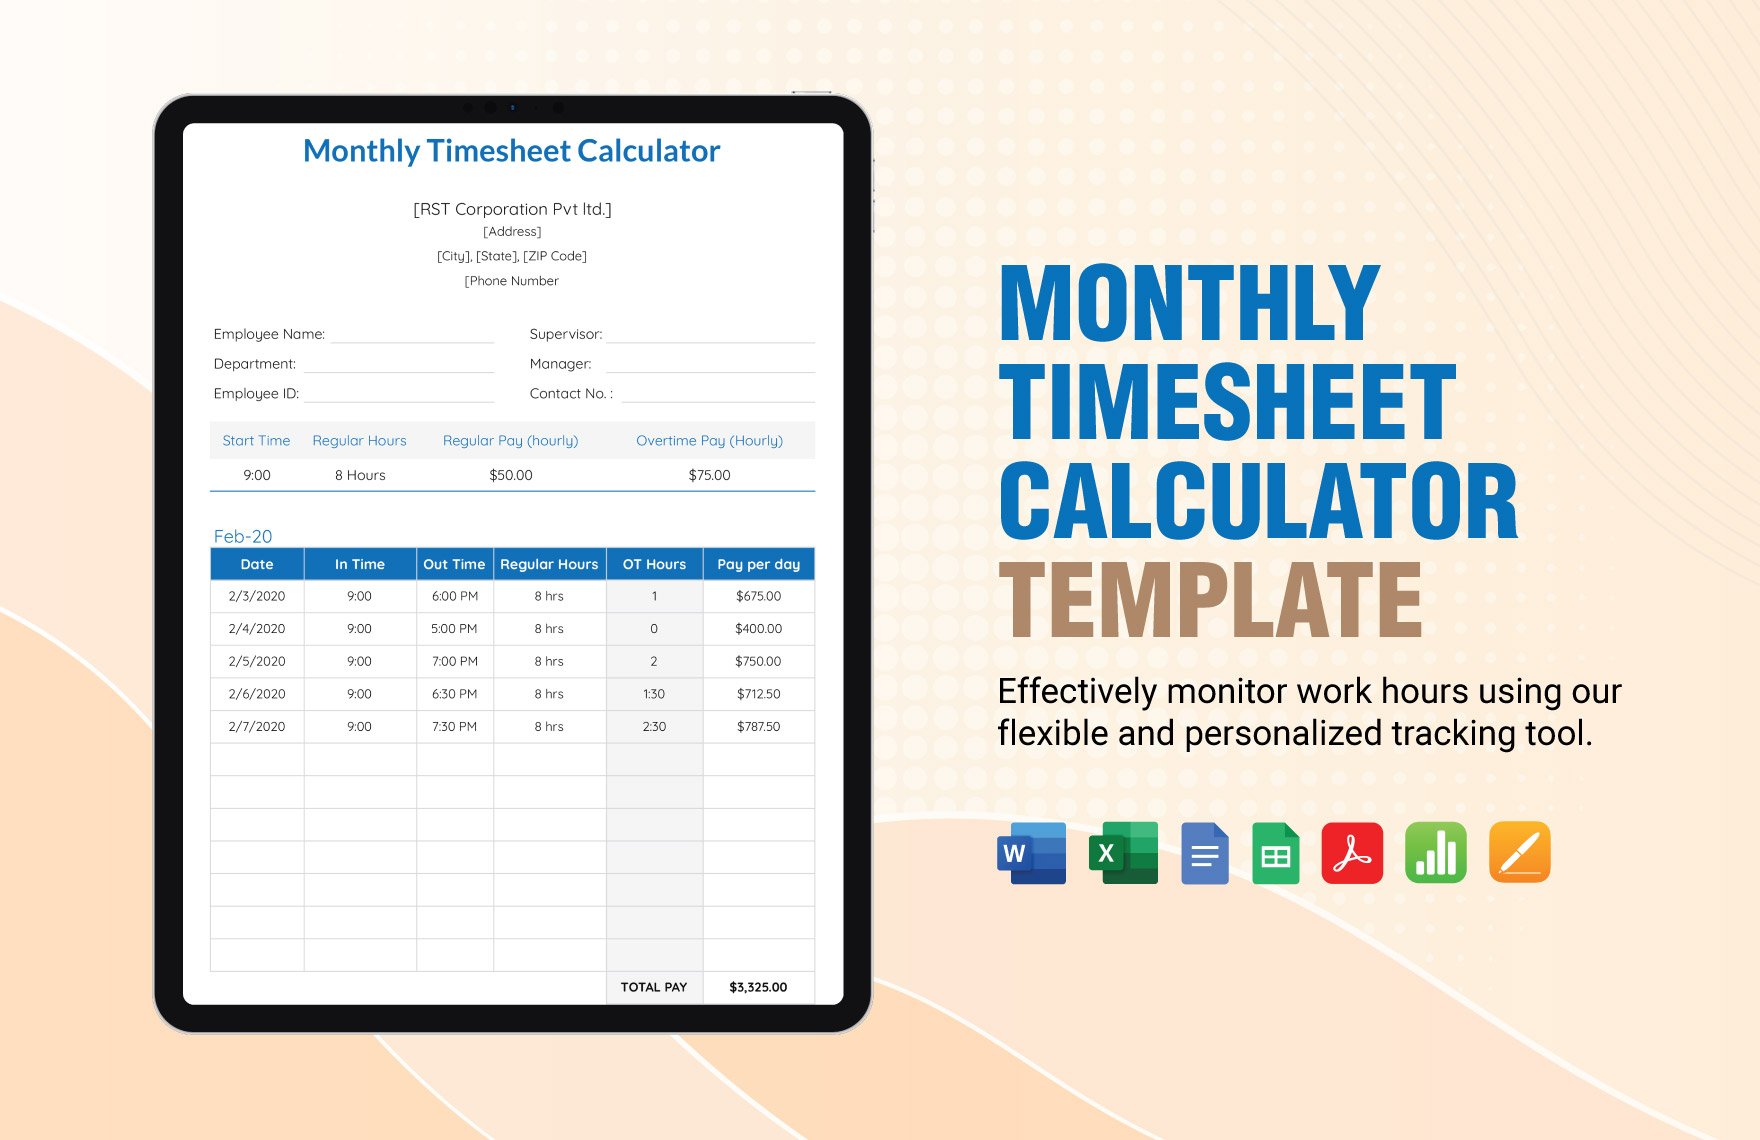 Monthly Timesheet Calculator Template in Word, Google Docs, Excel, PDF, Google Sheets, Apple Pages, Apple Numbers